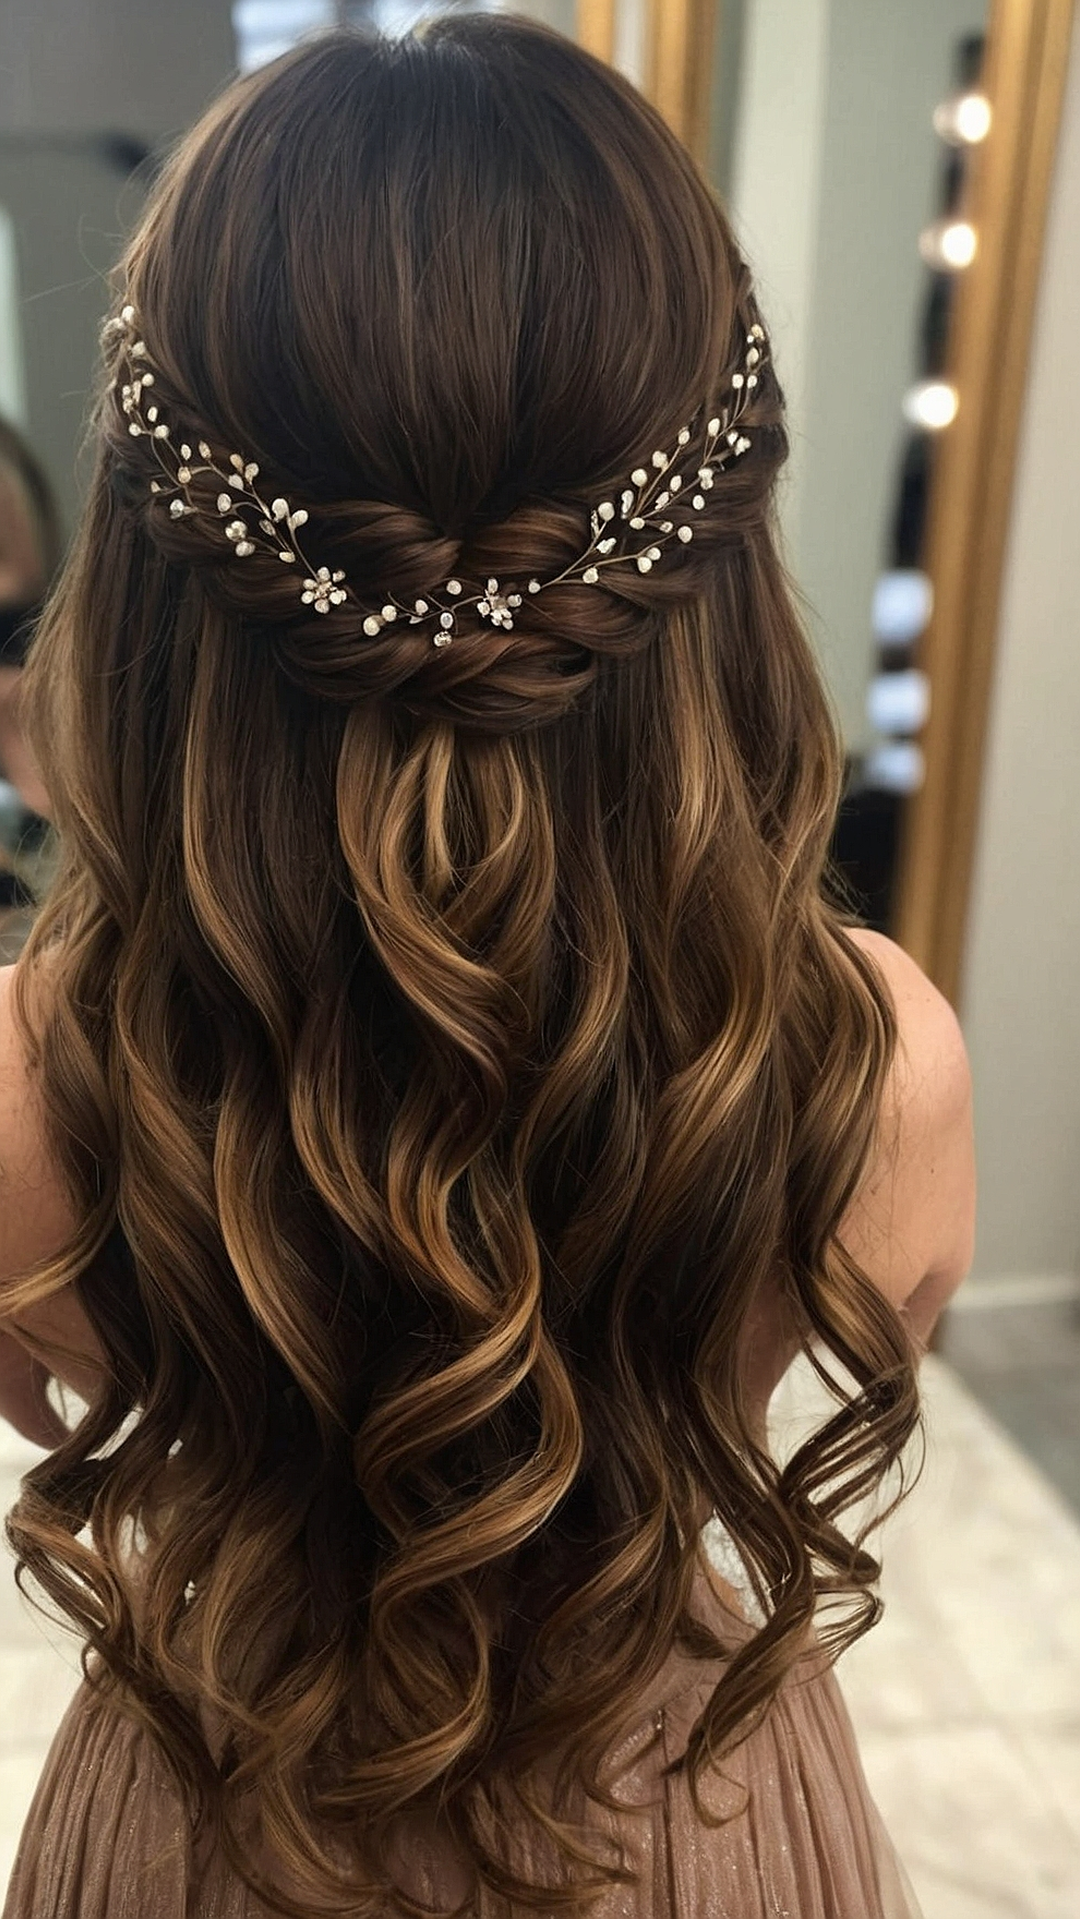 Flawless Finish: Medium-Length Prom Hairstyles to Wow